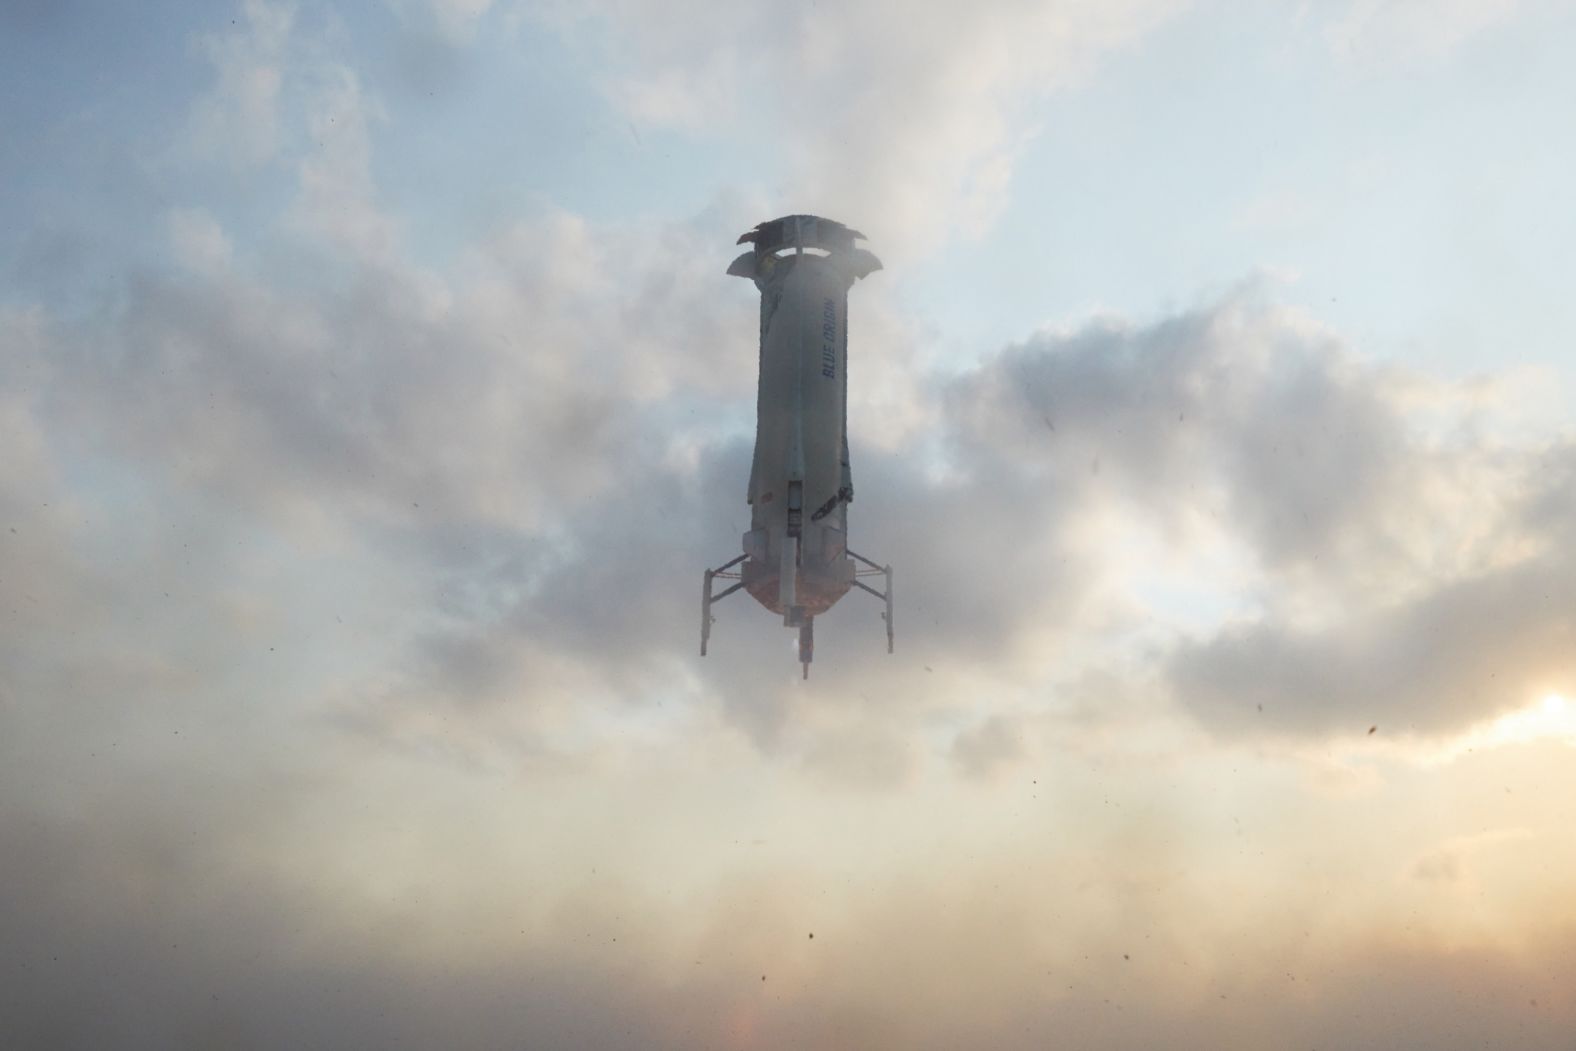 The rocket booster prepares to land.